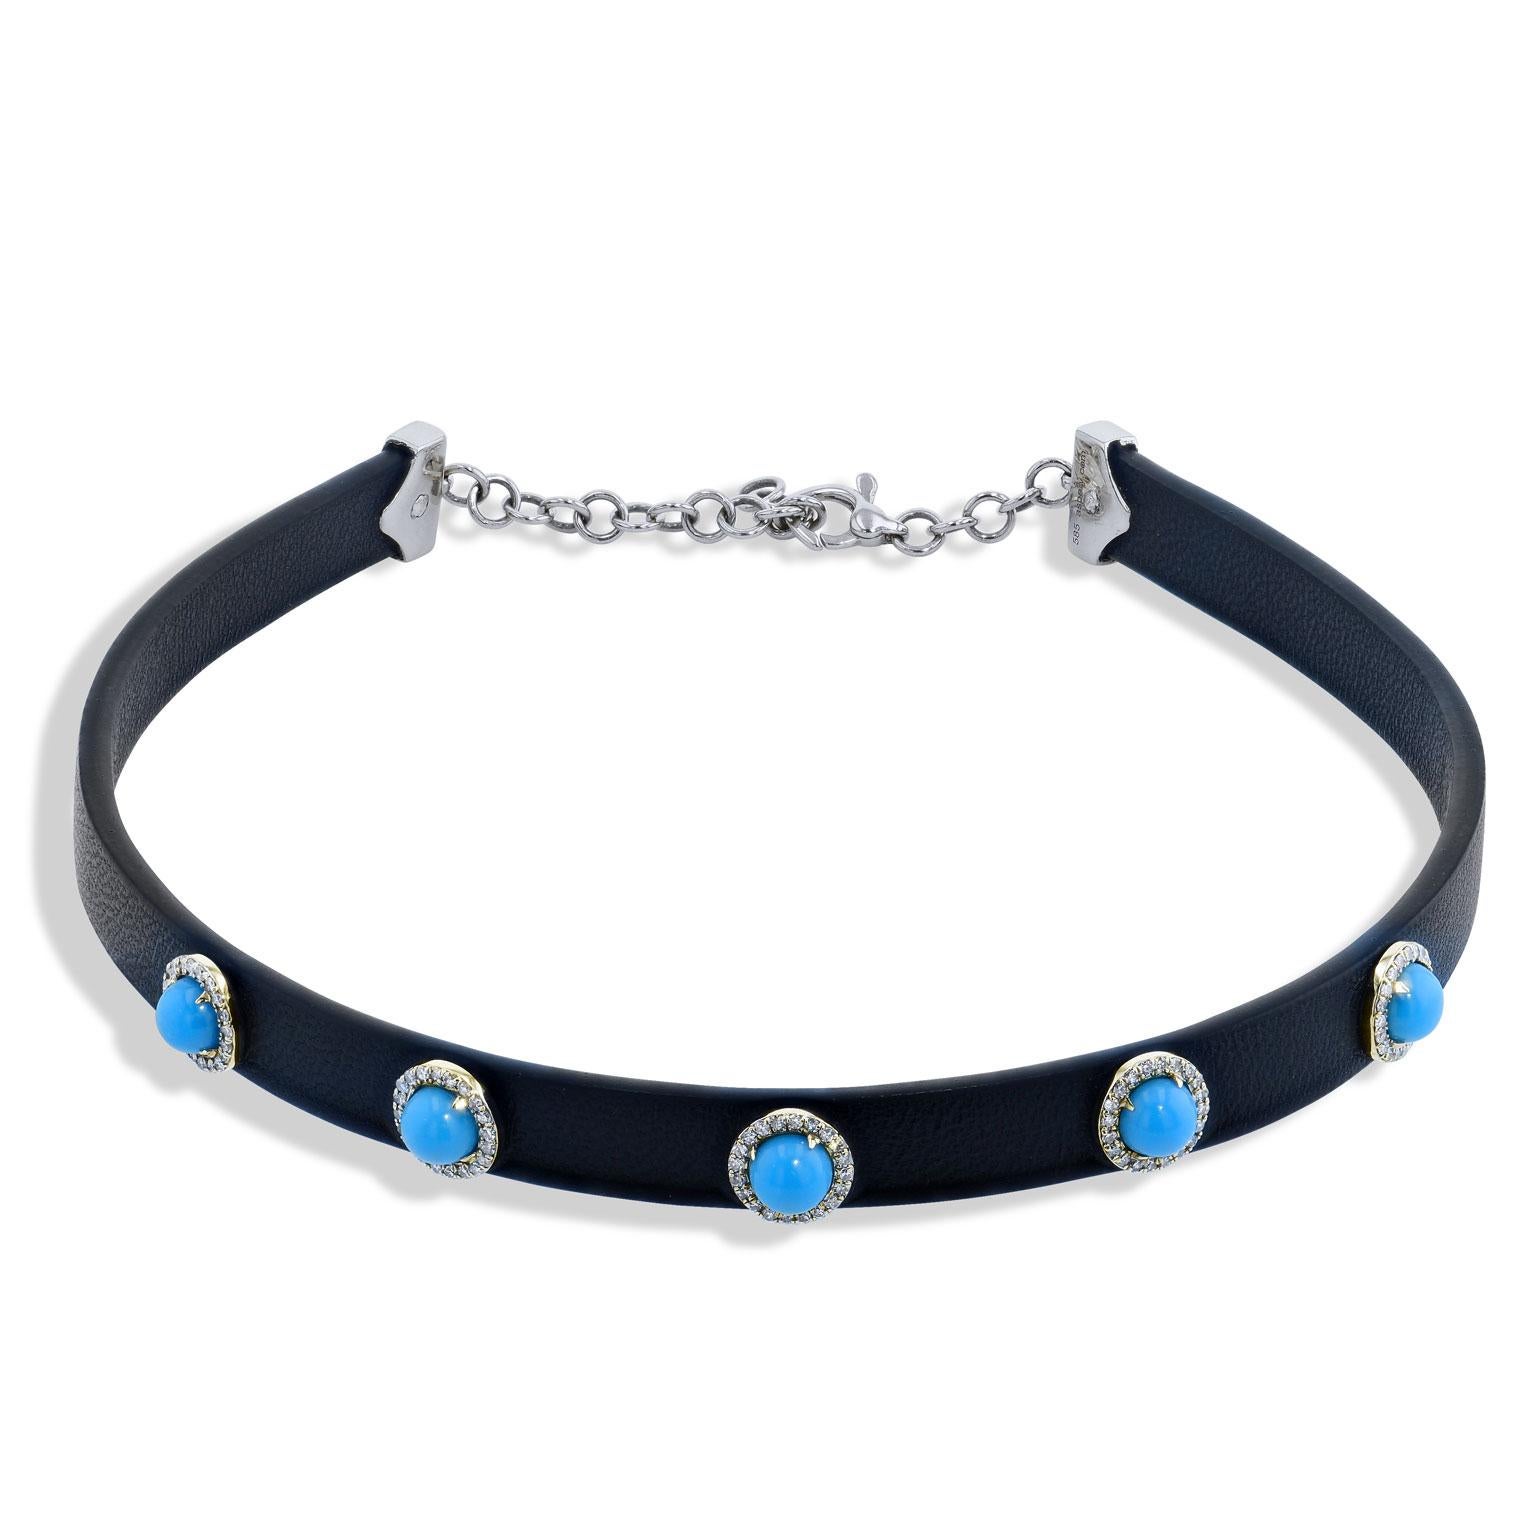 Round Cut 4.31 Carat Turquoise and Diamond Black Leather Choker Necklace